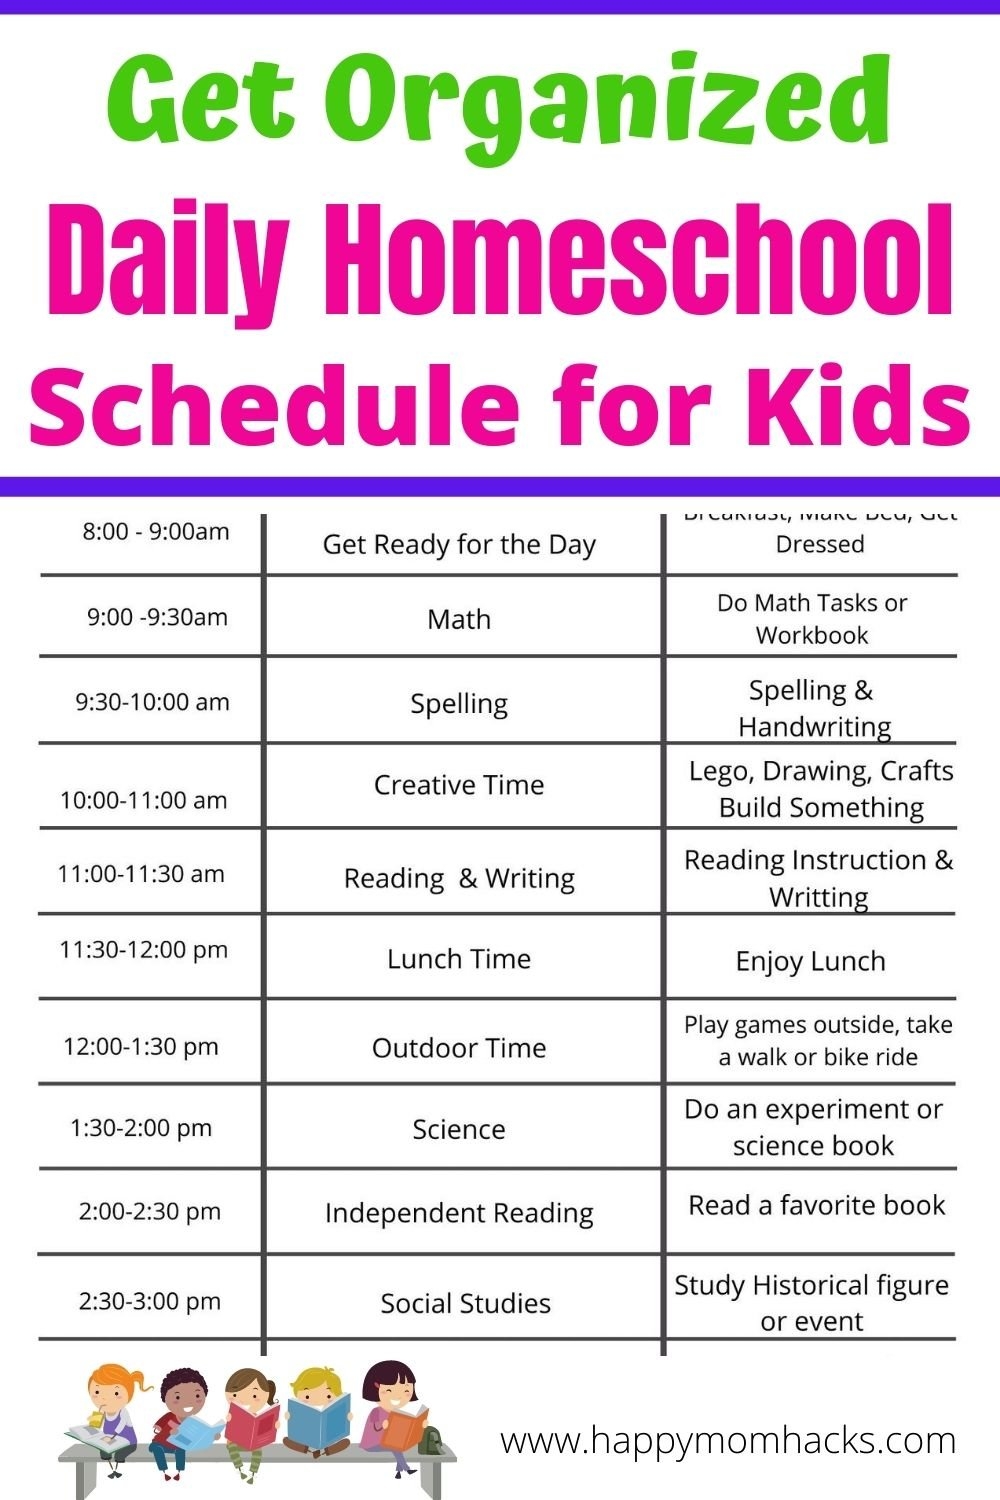 Free Printable Homeschool Schedule For Kids That s Easy To Follow